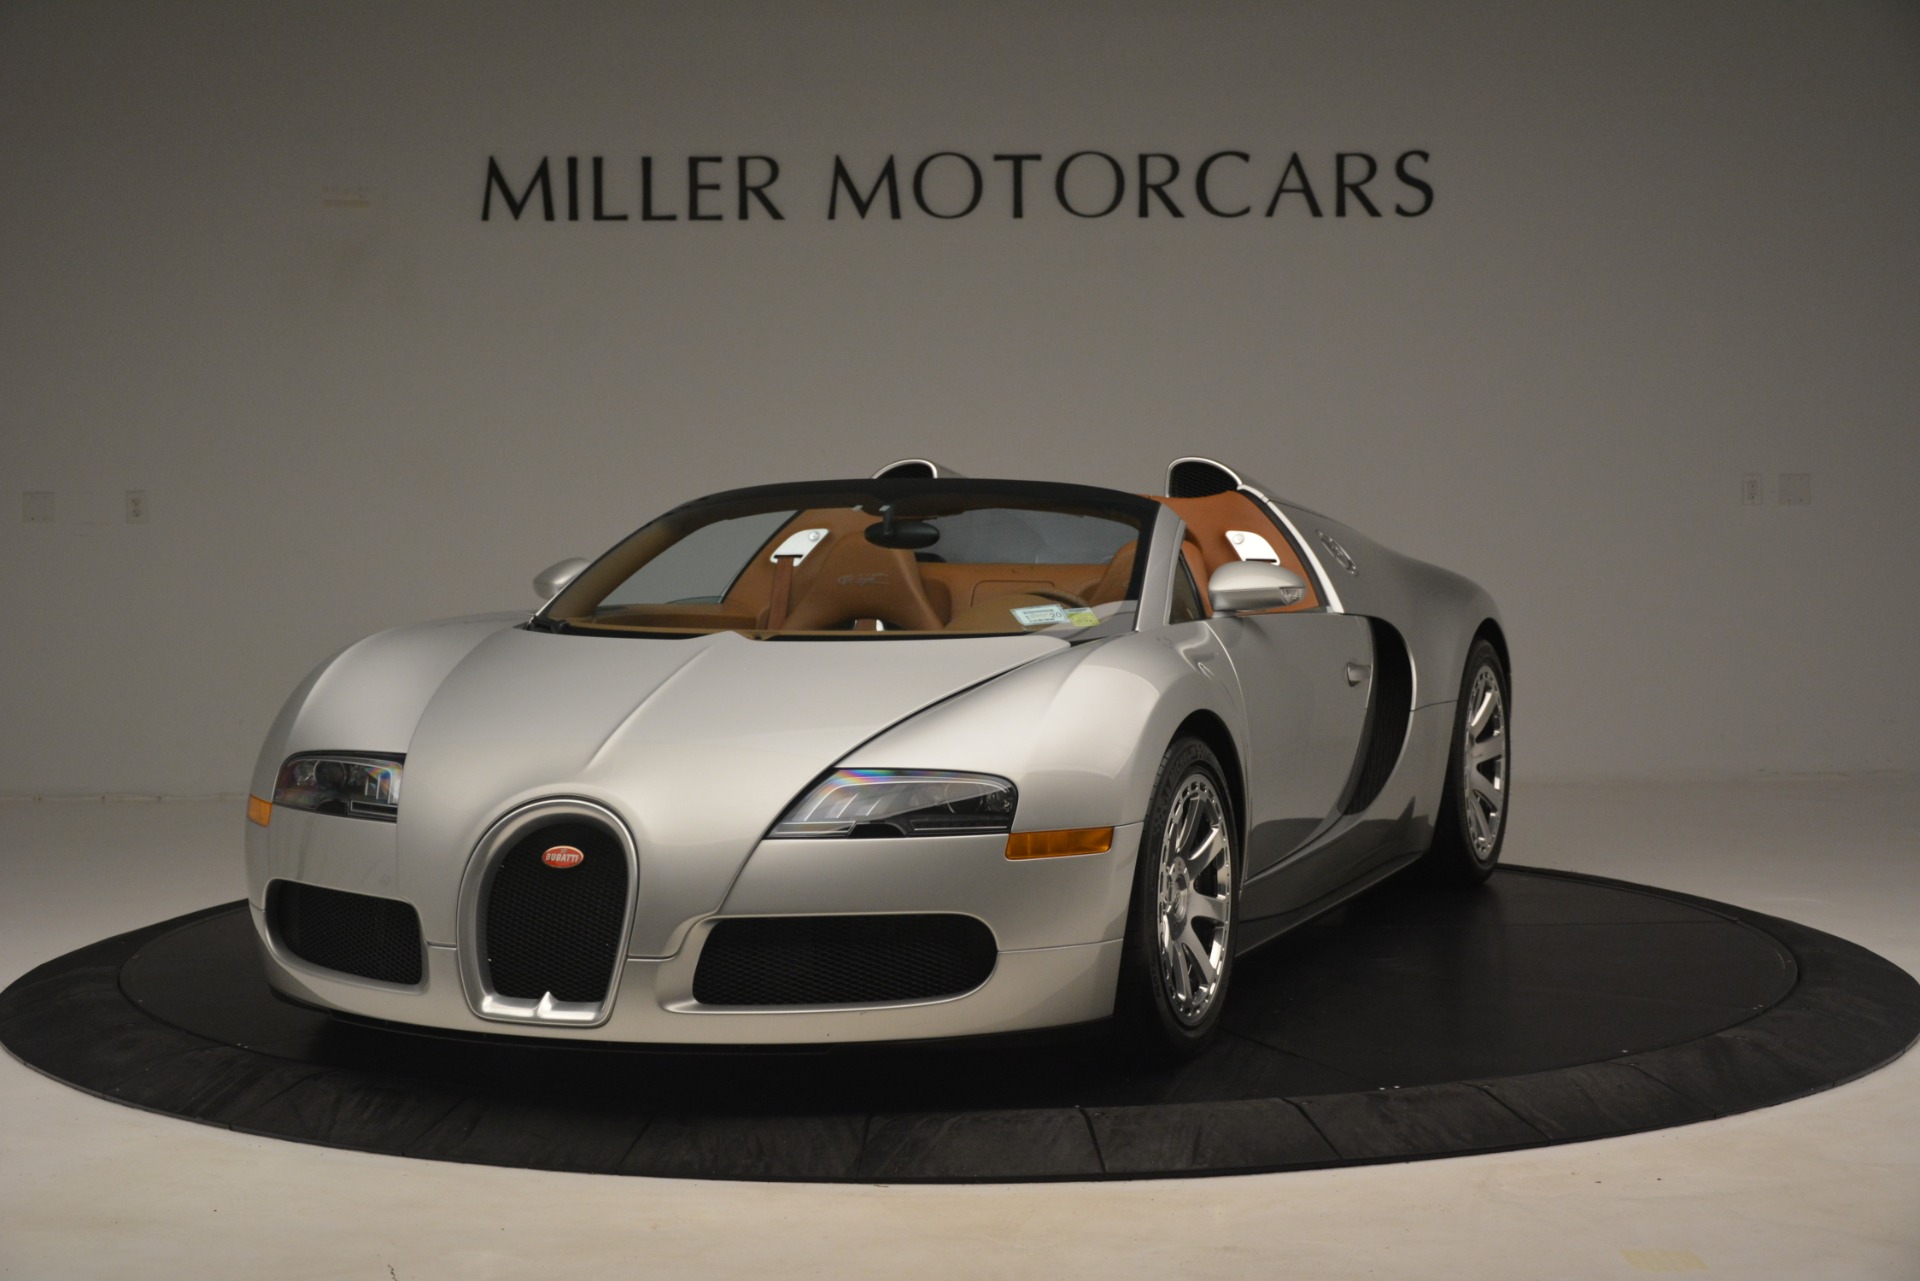 Used 2010 Bugatti Veyron 16.4 Grand Sport for sale $1,900,000 at Maserati of Westport in Westport CT 06880 1